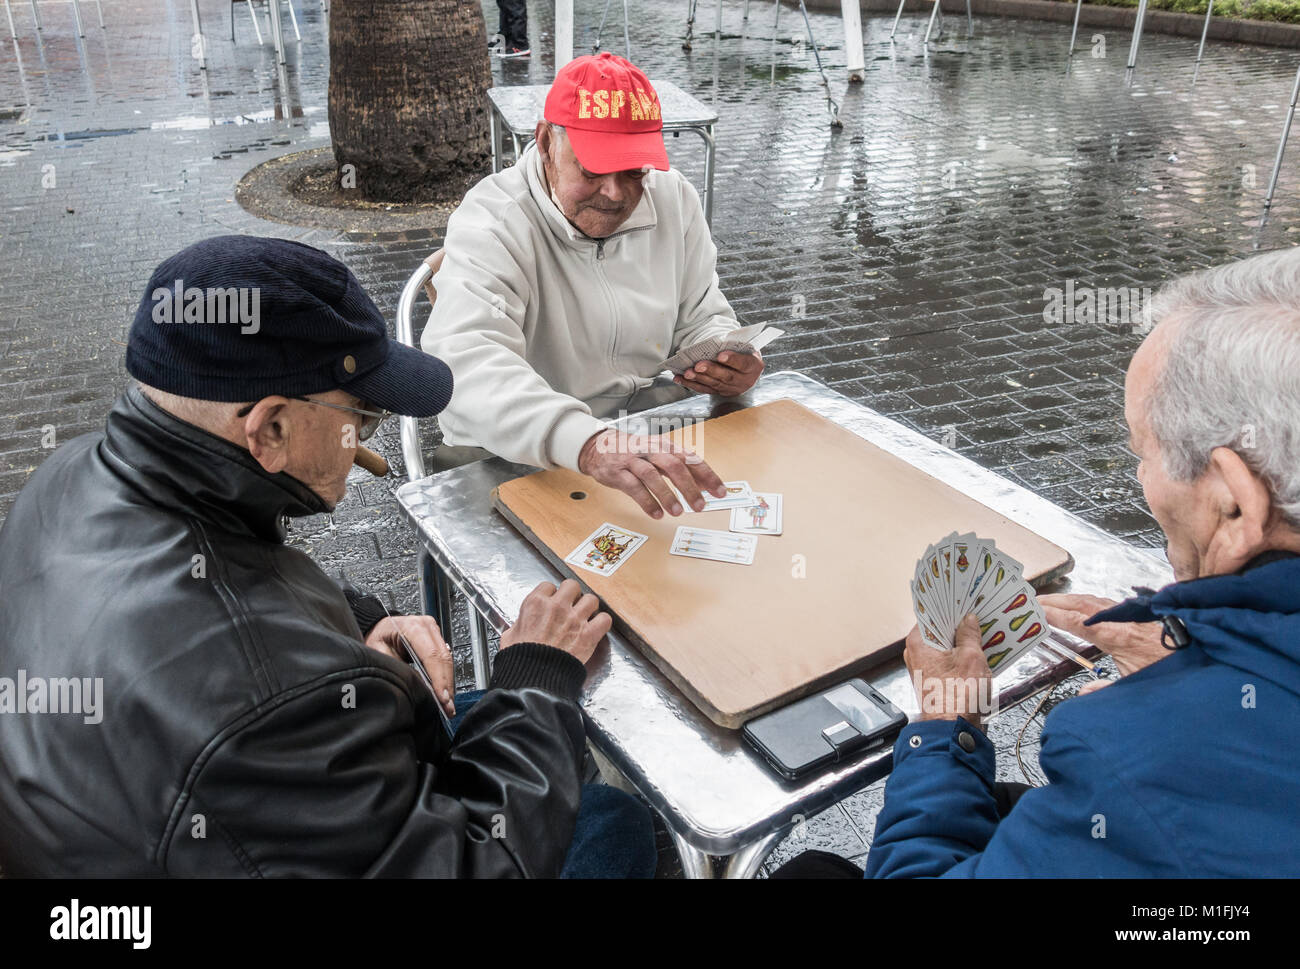 Las Palmas, Gran Canaria, Canary Islands, Spain. 30th January, 2018. Weather:  Locals playing cards in the rain on a wet and cold Tuesday morning in Las  Palmas, the capital of Gran Canaria.